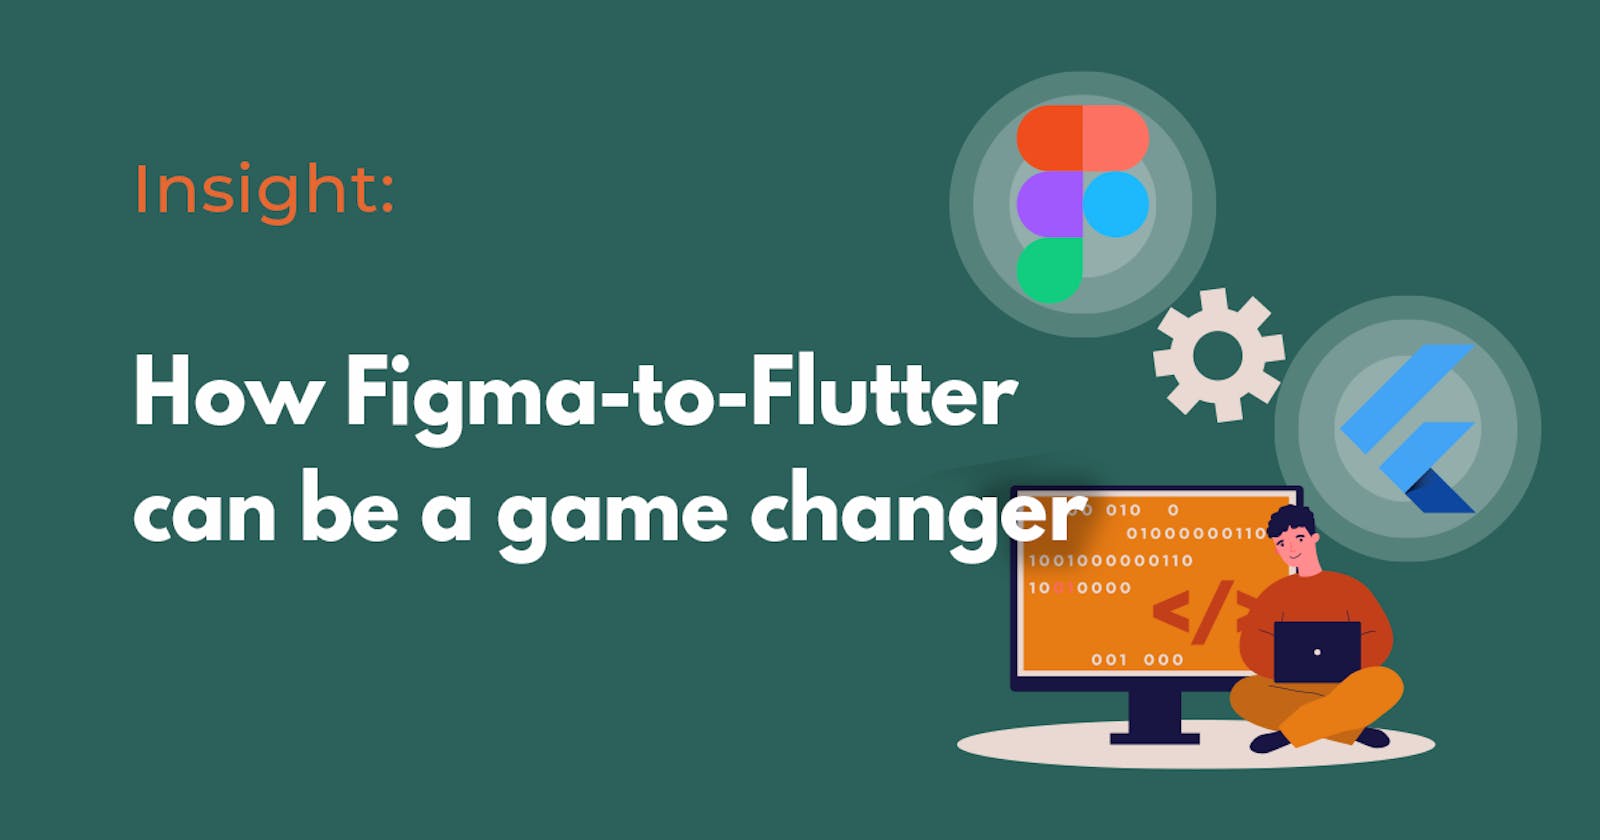 How Figma-to-Flutter is the new game changer